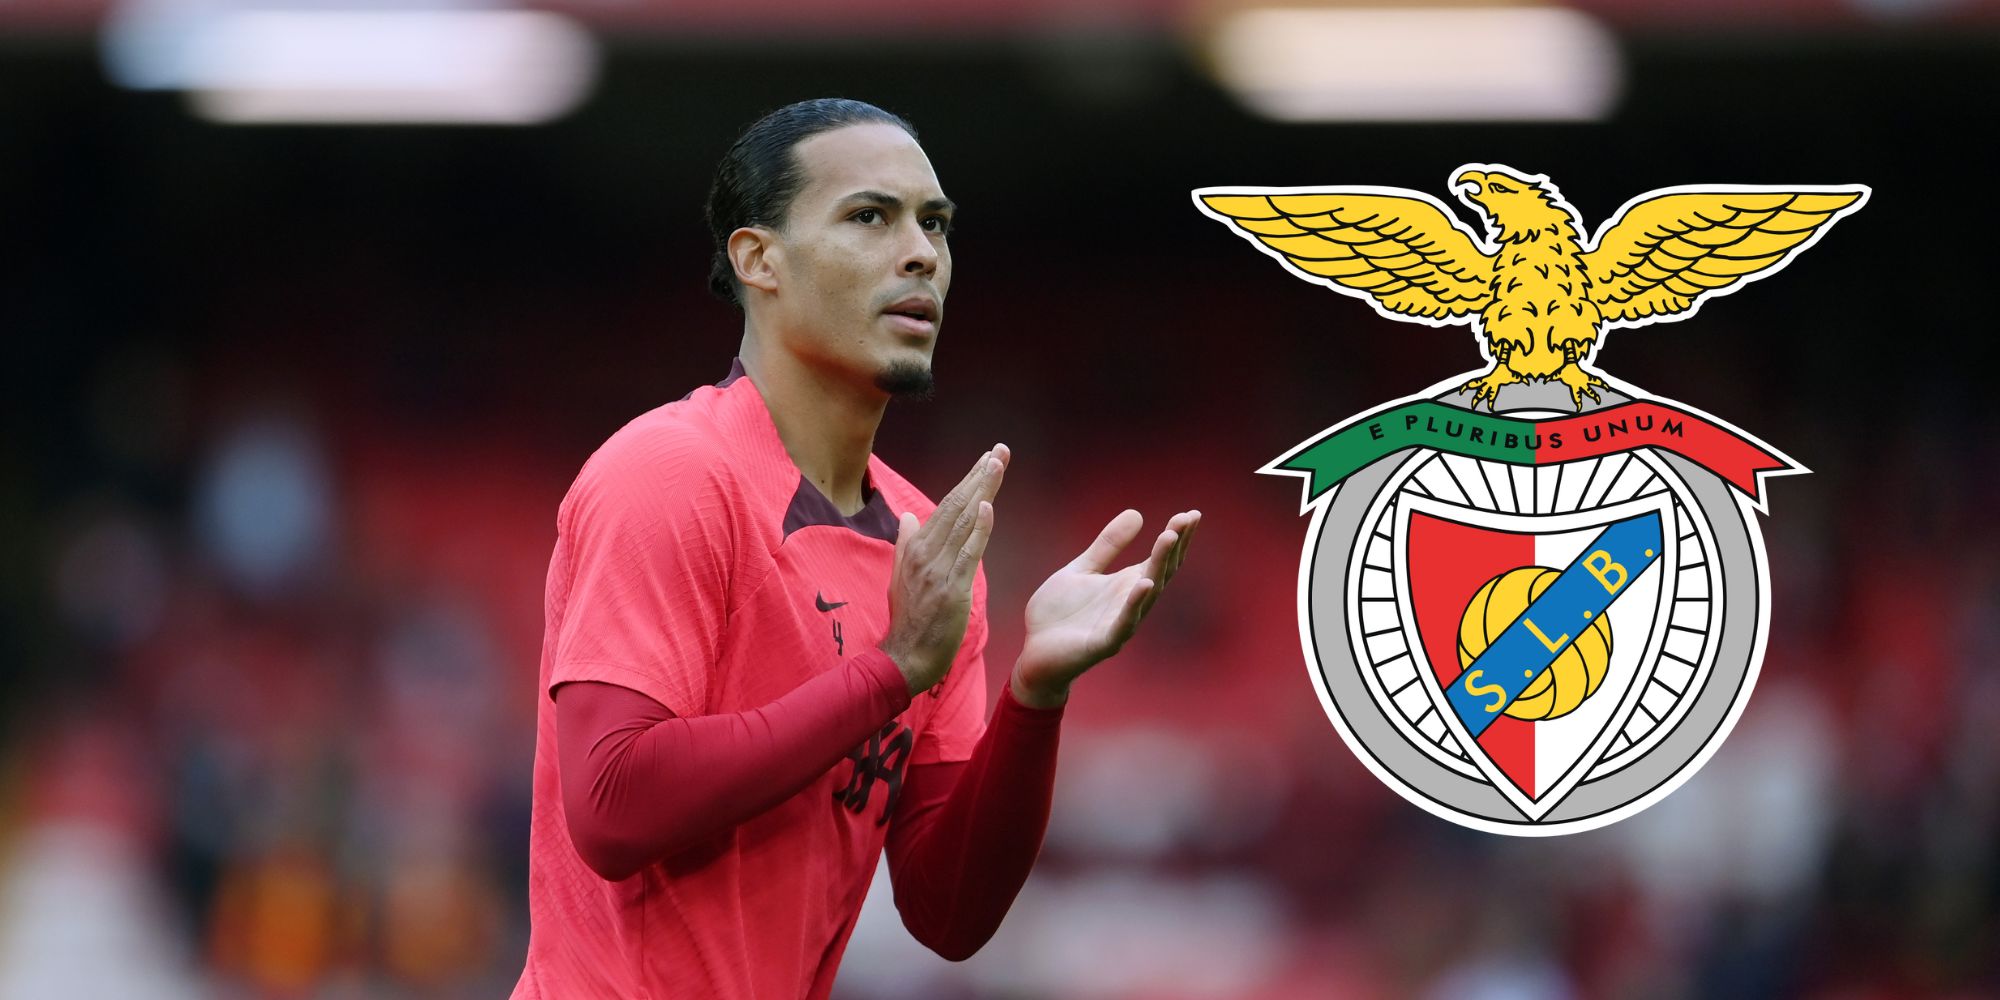 Liverpool should sign next Van Dijk; Fabrizio Romano says he will be worth £69.6-£78.3m in future – opinion